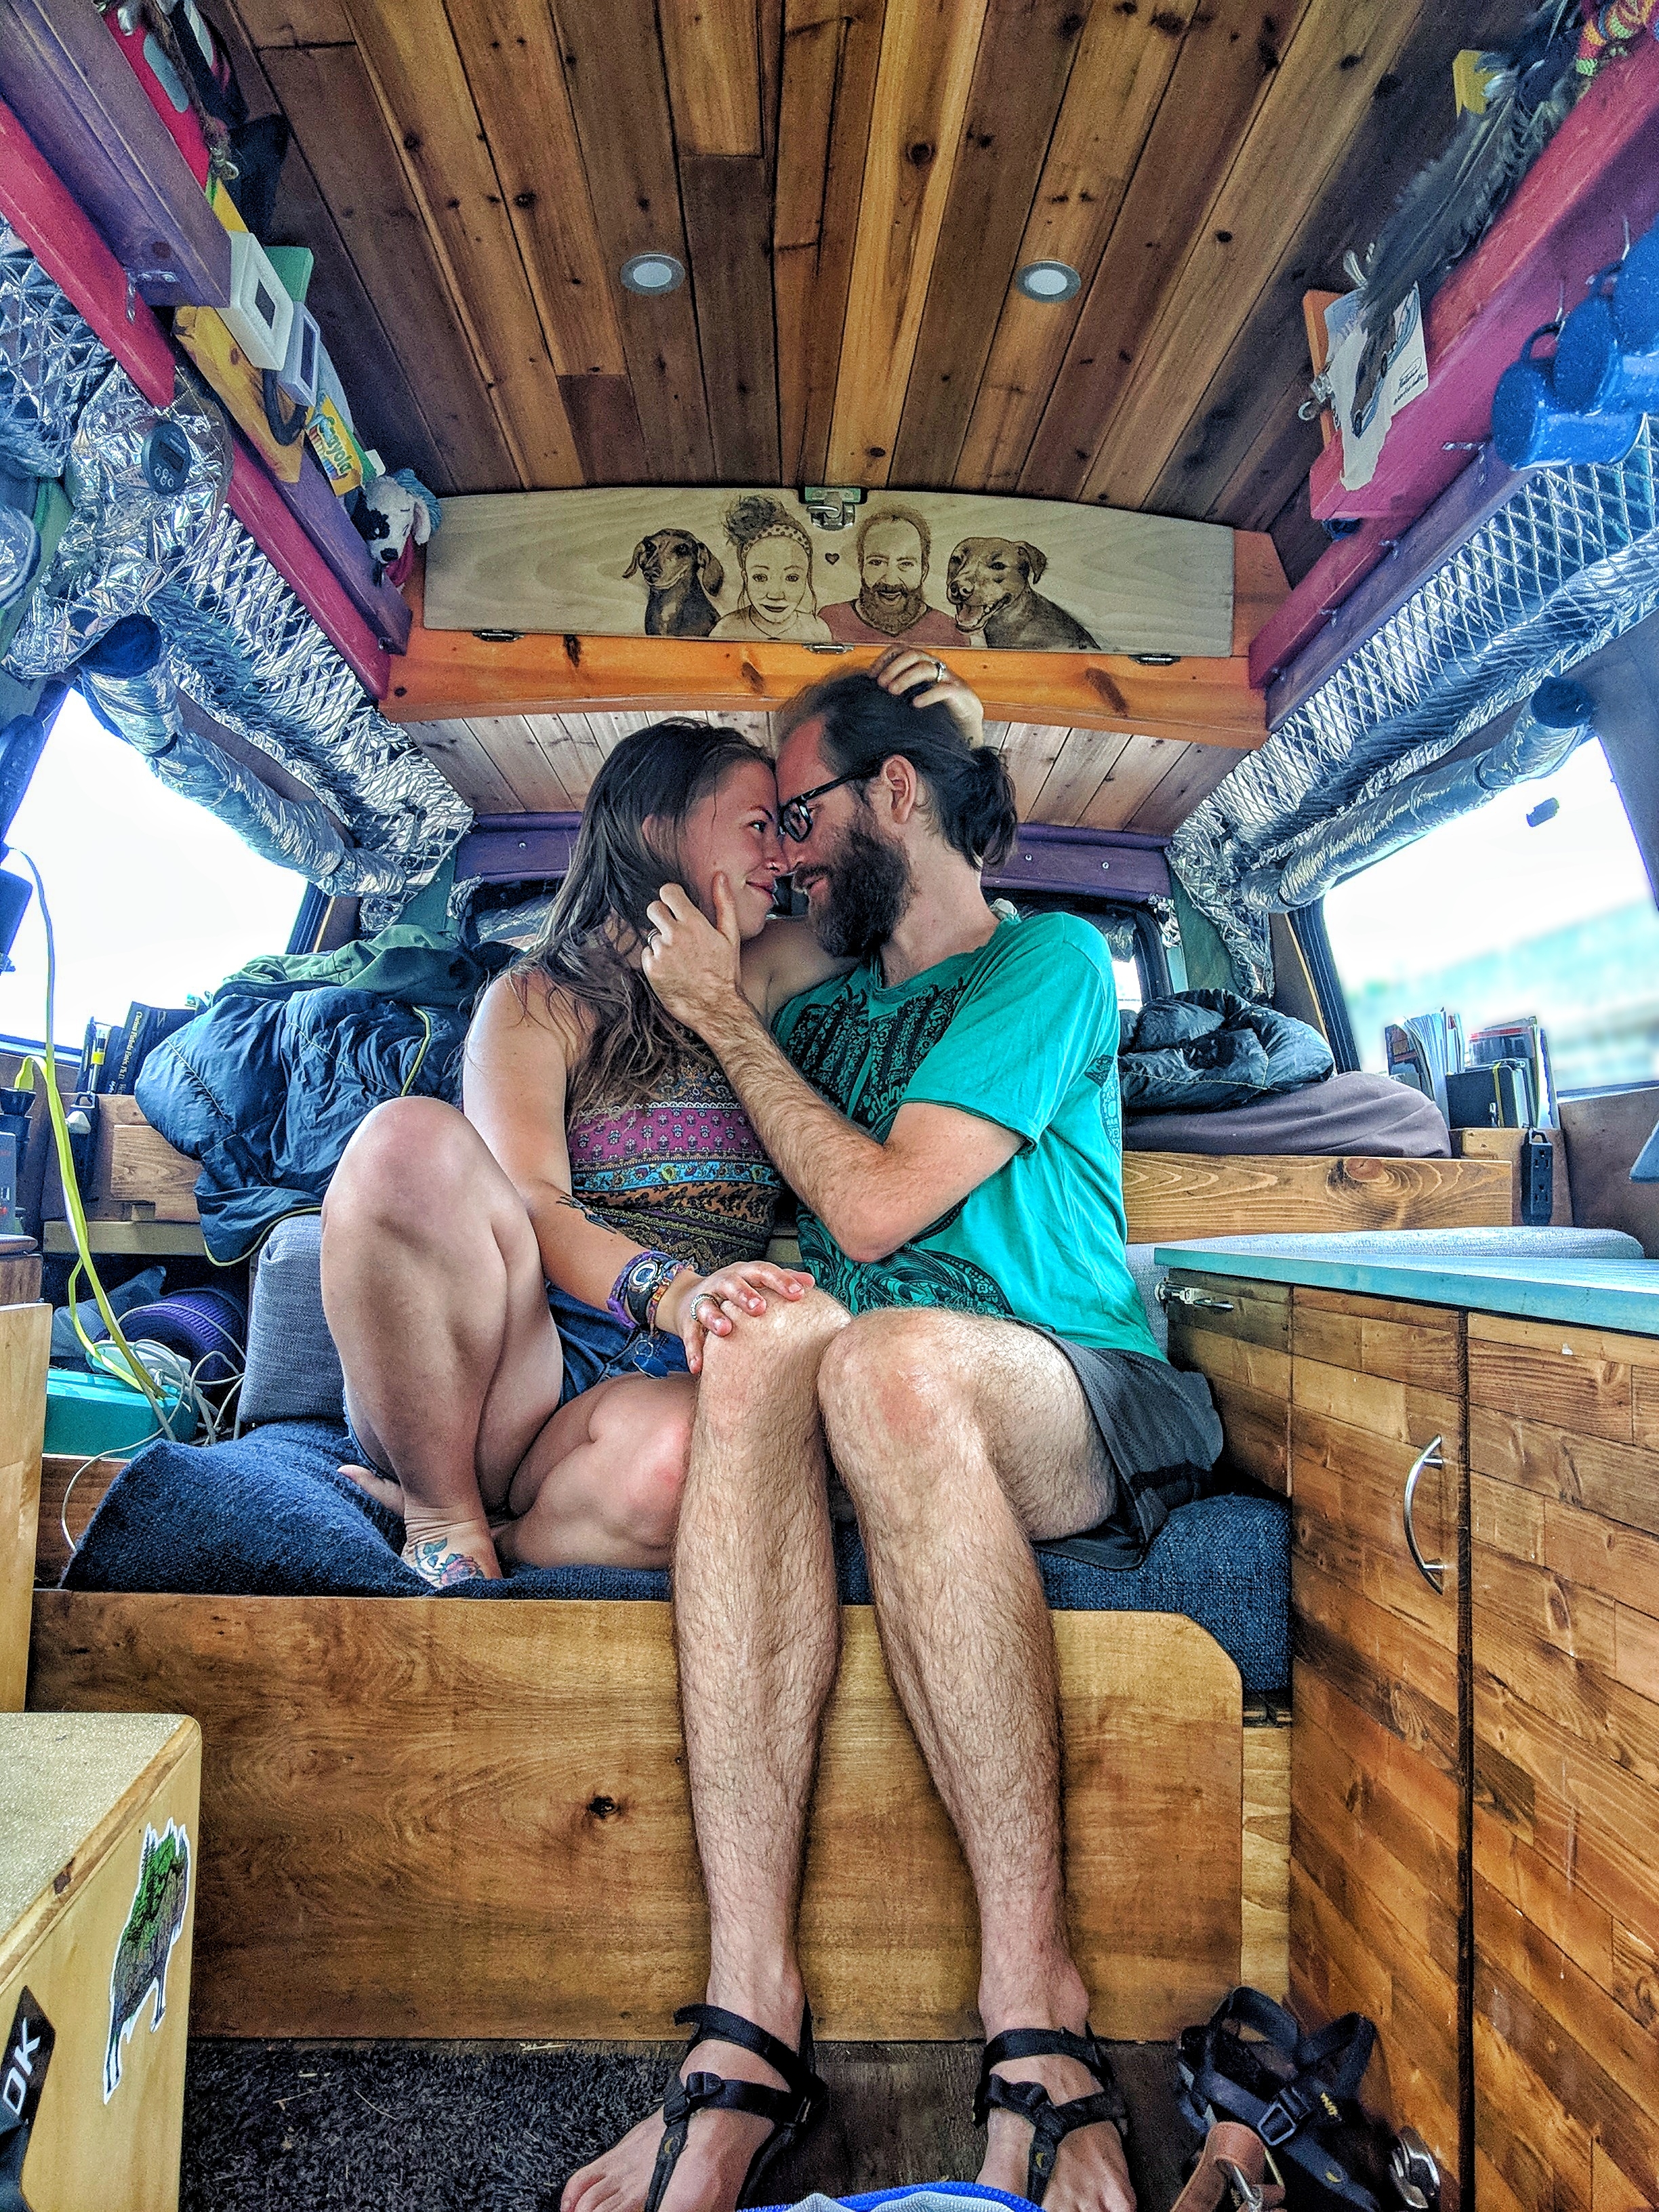 How Much Does A #VanLife Build Cost? Two Pros Give Advice